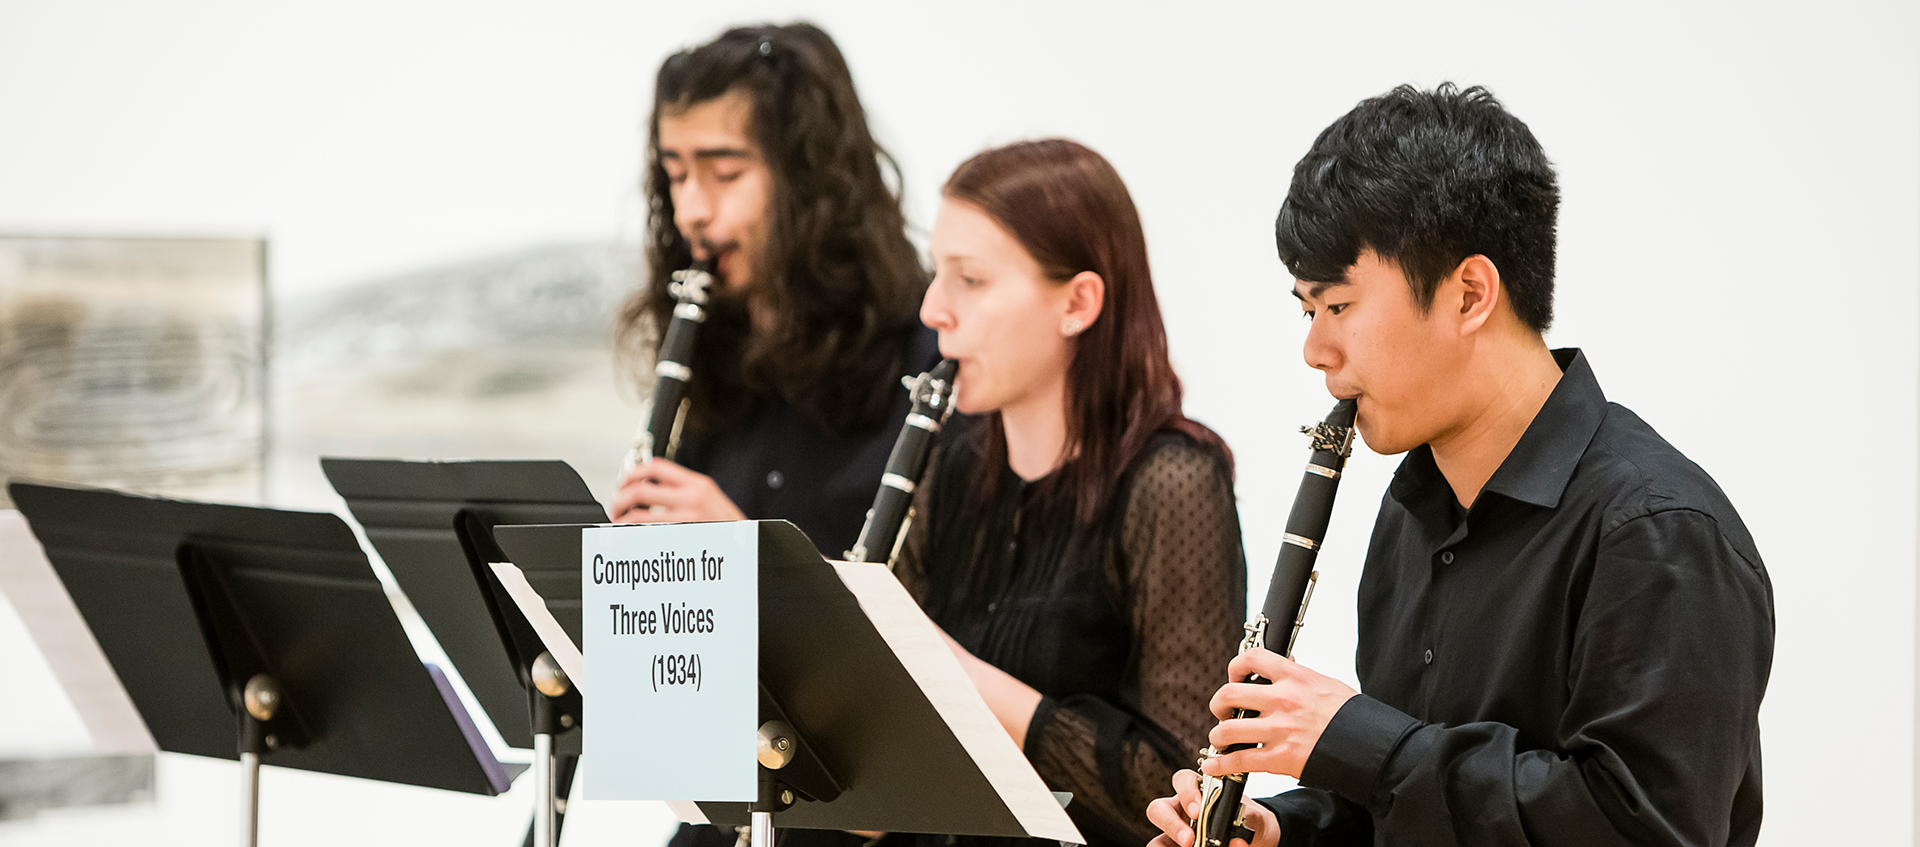 A photograph of three people playing clarinet in a gallery space.